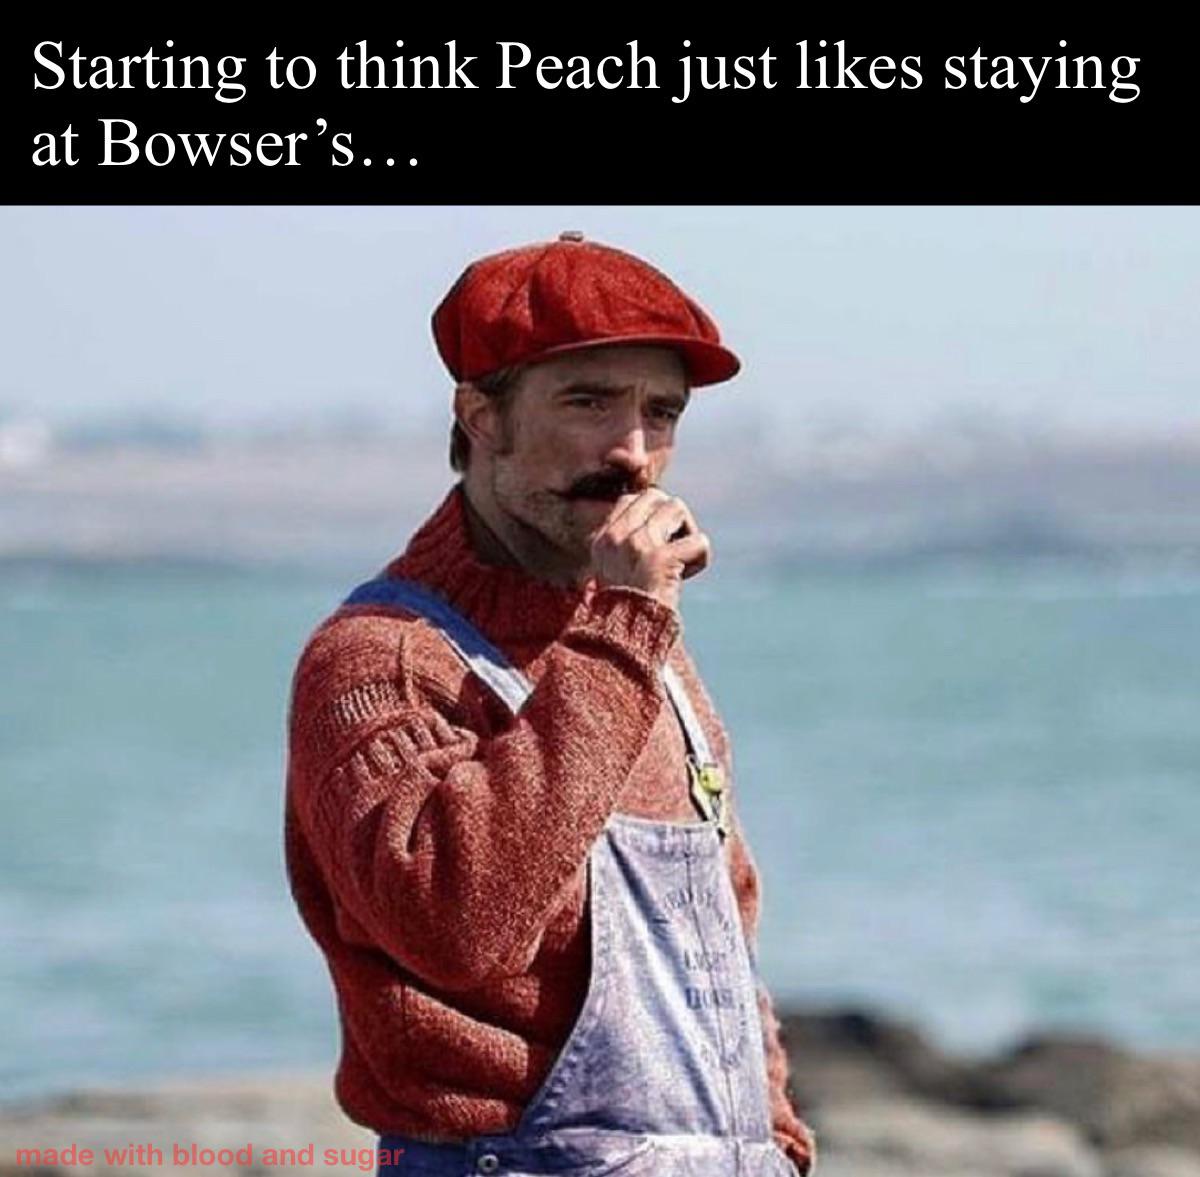 funny memes - photo caption - Starting to think Peach just staying at Bowser's... made with blood and sugar 1045